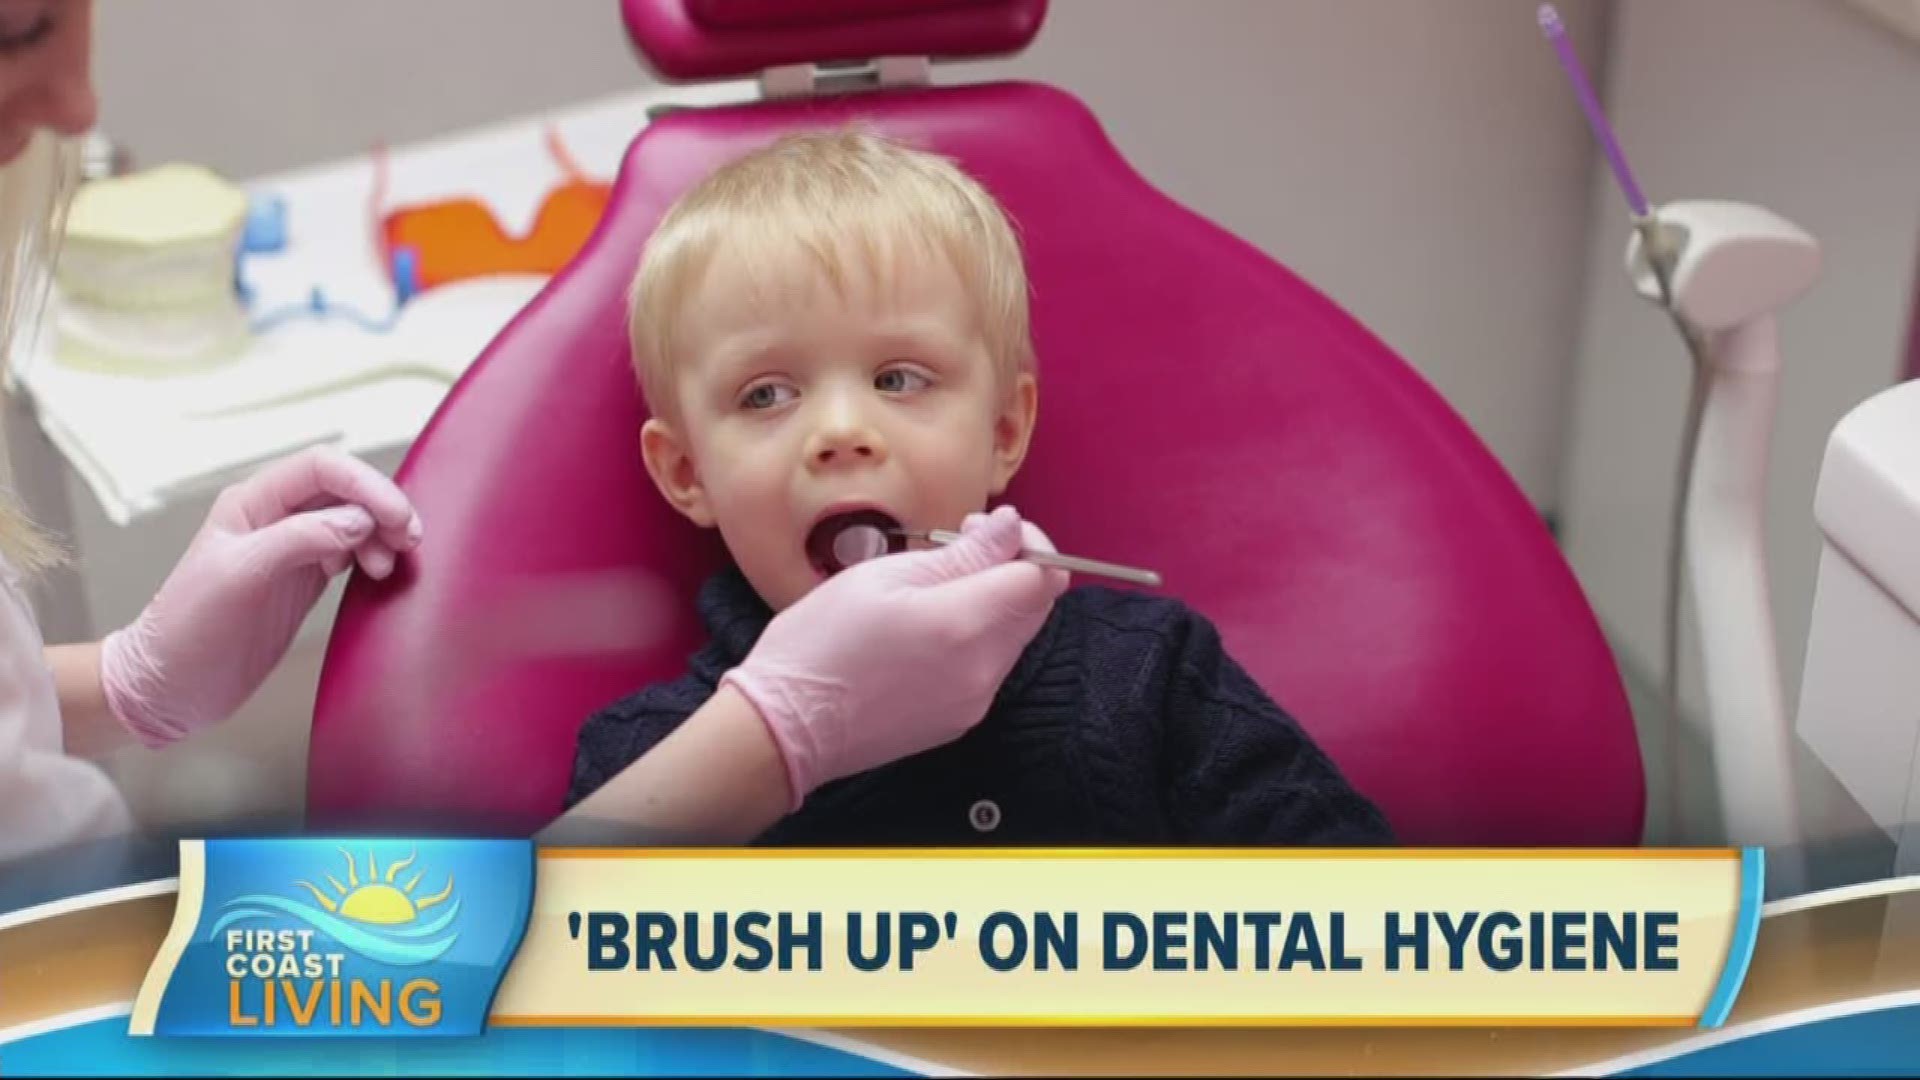 Editor-in-chief of Simple Moms Guide offers tips on how you can help you child maintain good dental hygiene.